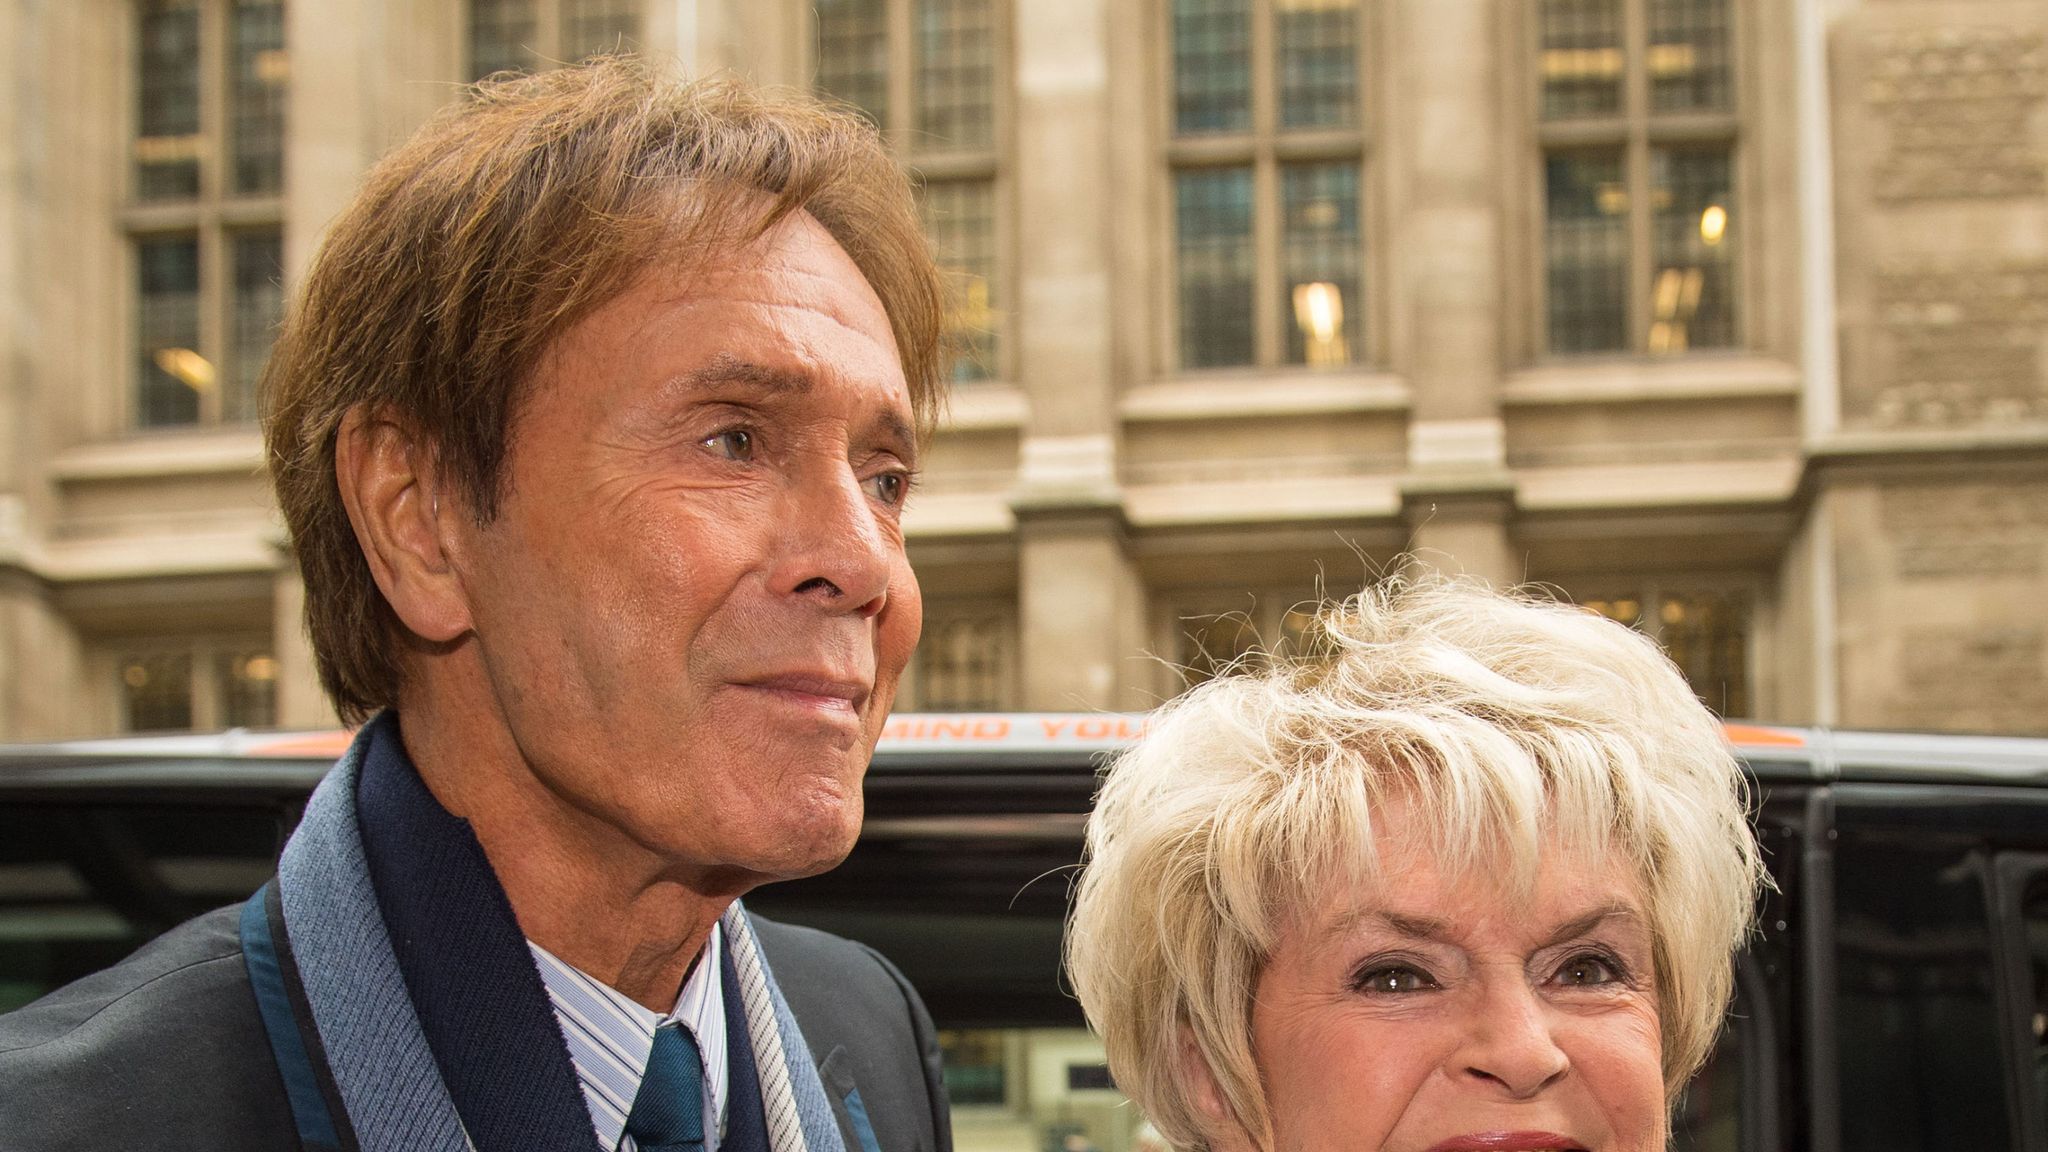 Sir Cliff Richard Breaks Down In Tears As He Gives Evidence During Bbc Trial Uk News Sky News 2797